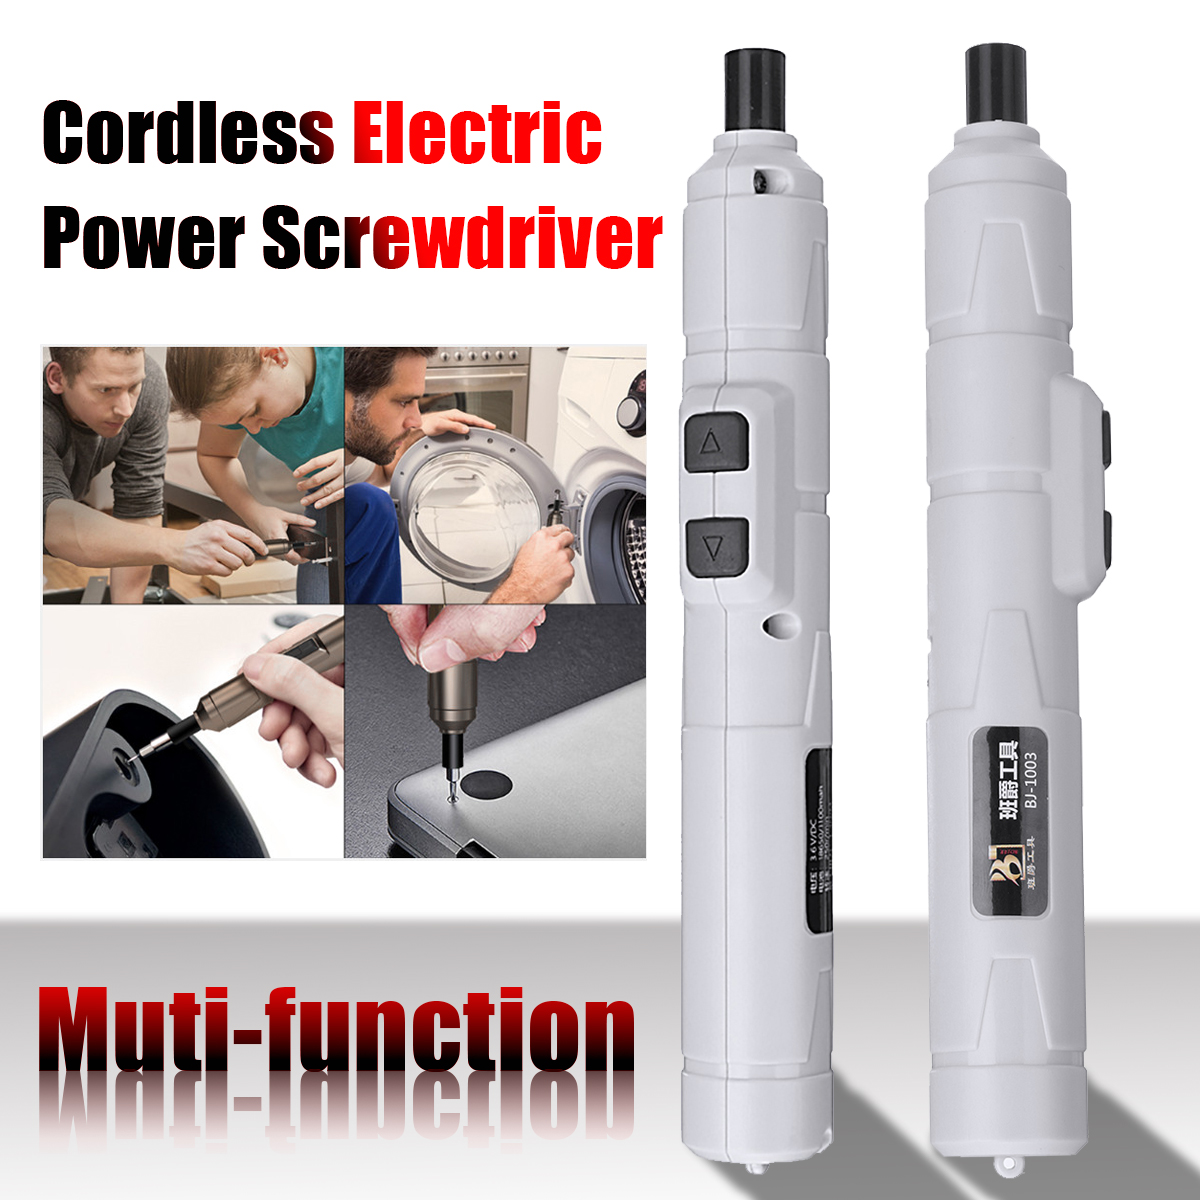 DC36V-Mini-Lithium-Cordless-Electric-Screwdriver-Power-Screw-Driver-DIY-Tool-With-USB-Charger-1582416-1